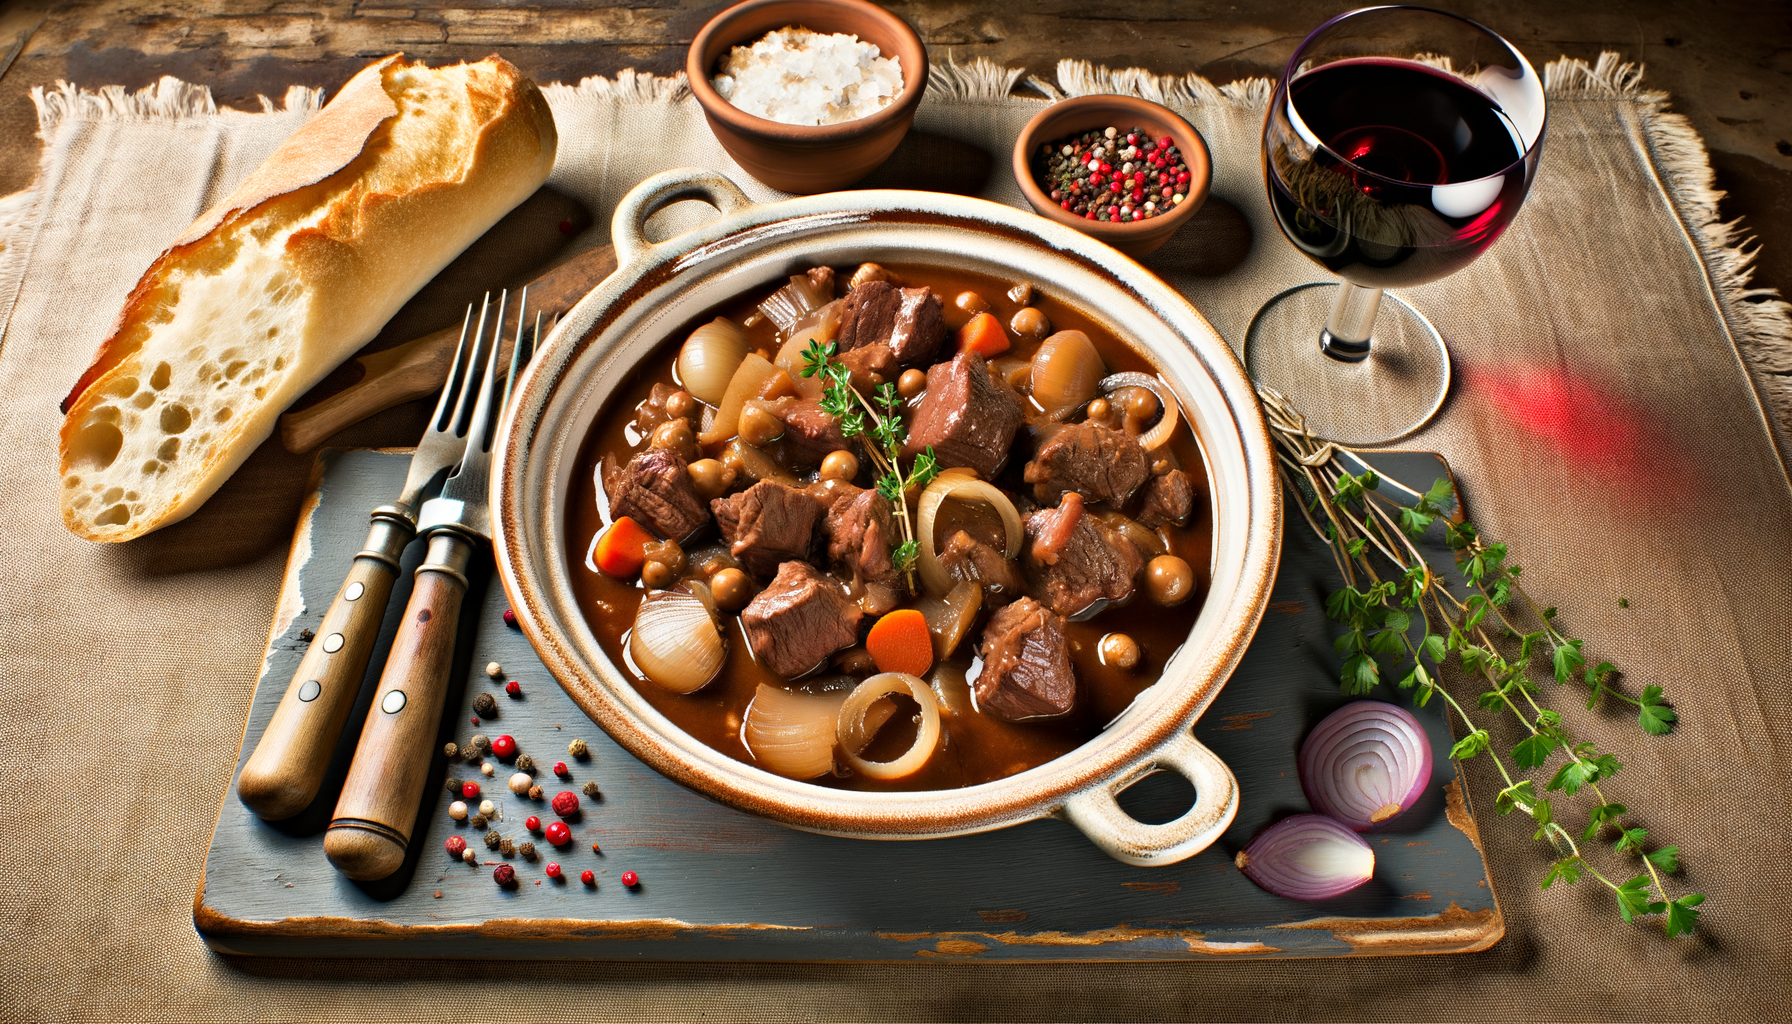 Tender beef Bourguignon in a rich wine sauce with carrots, onions, and mushrooms, served beside red wine and a baguette on a rustic table.